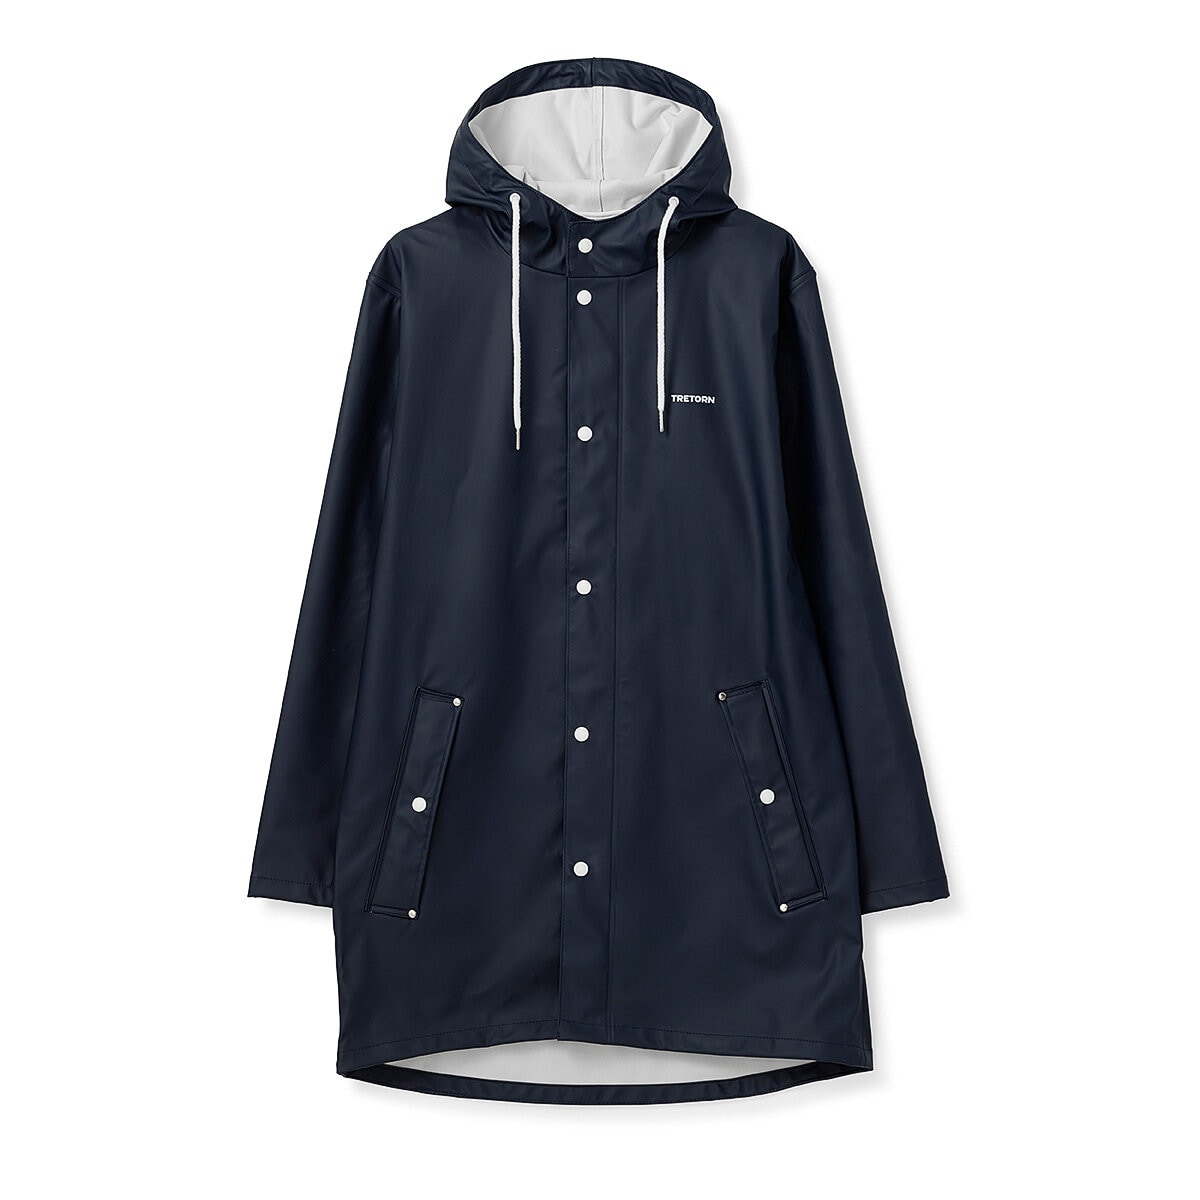 Wings rain jacket by Tretorn for men and women in the colour Navy